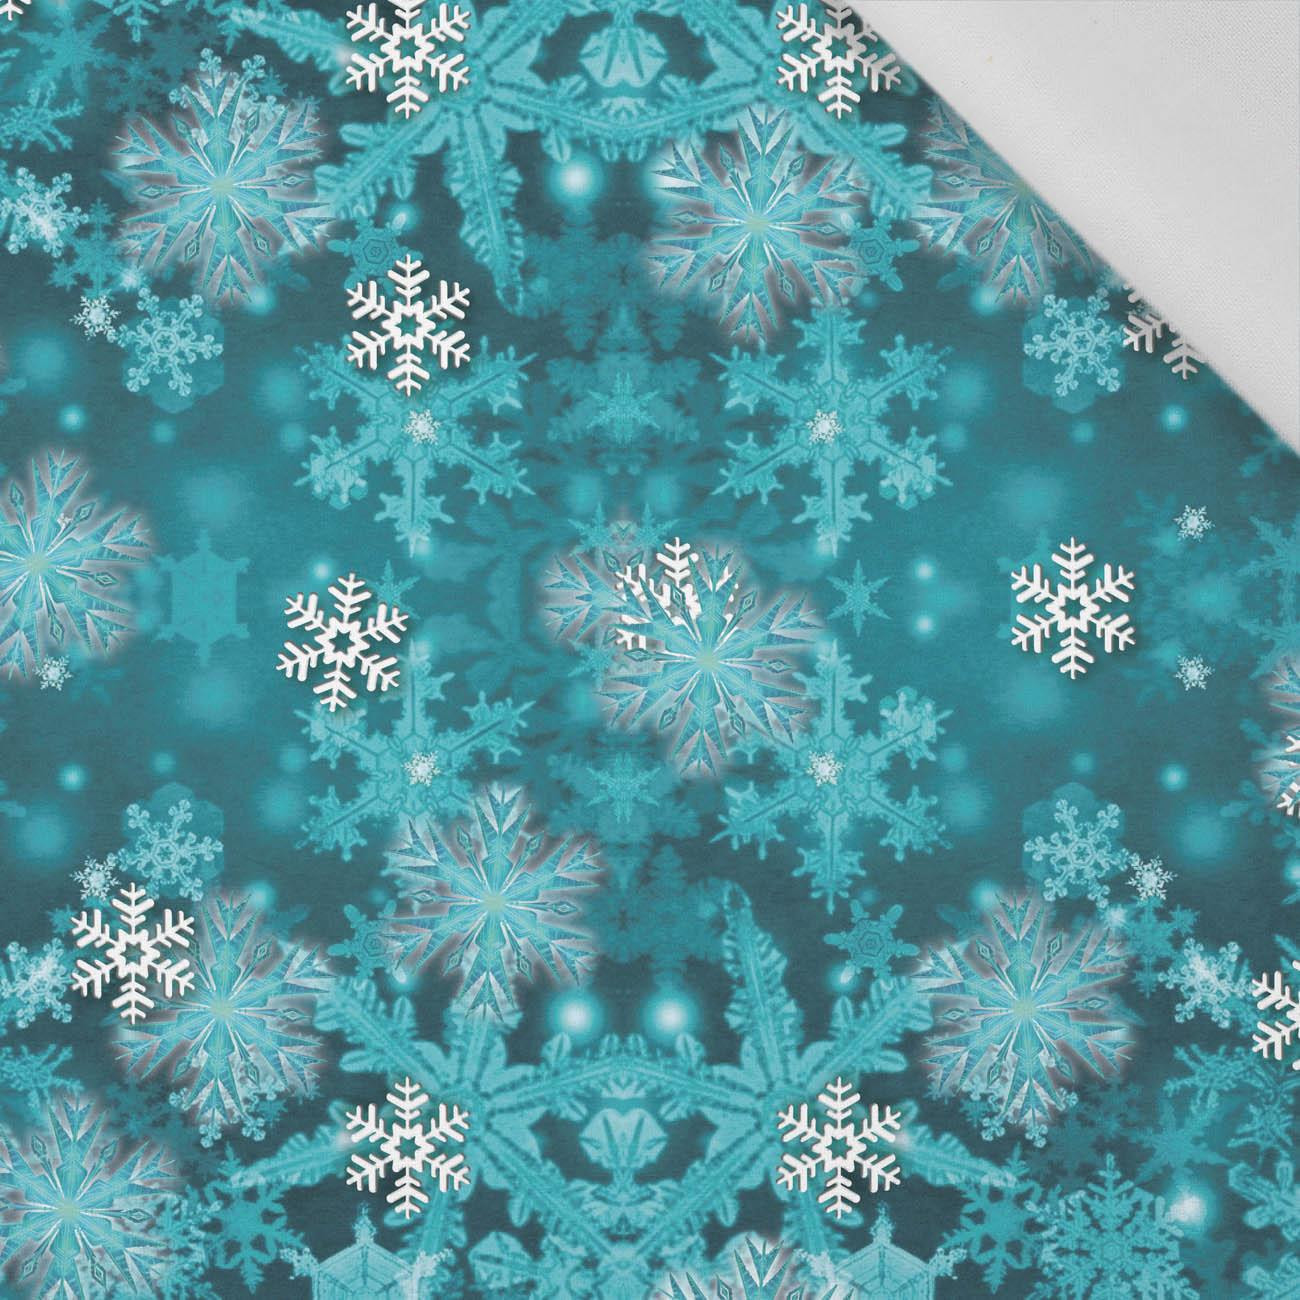 TURQUOISE SNOWFLAKES (PENGUINS) - Cotton woven fabric